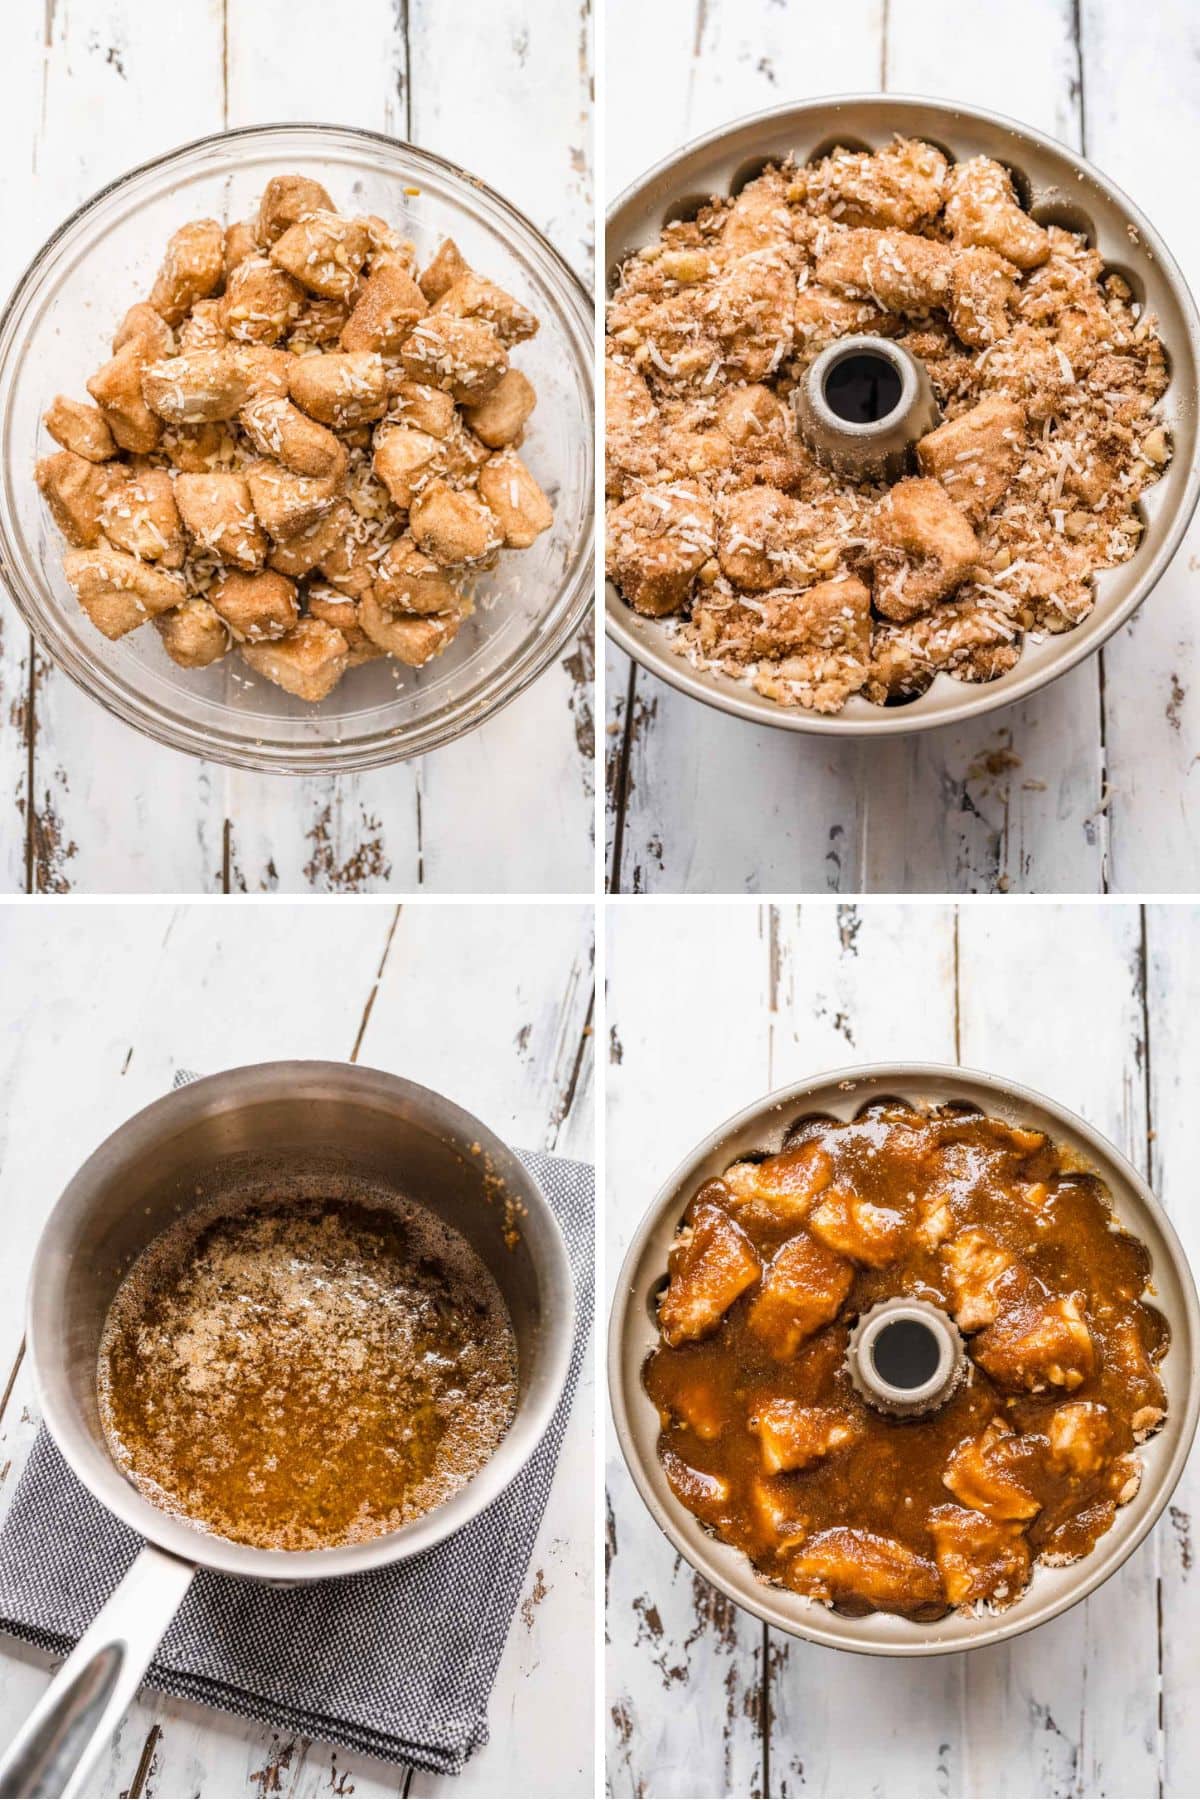 Hawaiian Monkey Bread four panel collage of preparation steps from dough in bowl with coconut, dough in pan, caramel sauce in pan, and assembled in pan with caramel on top